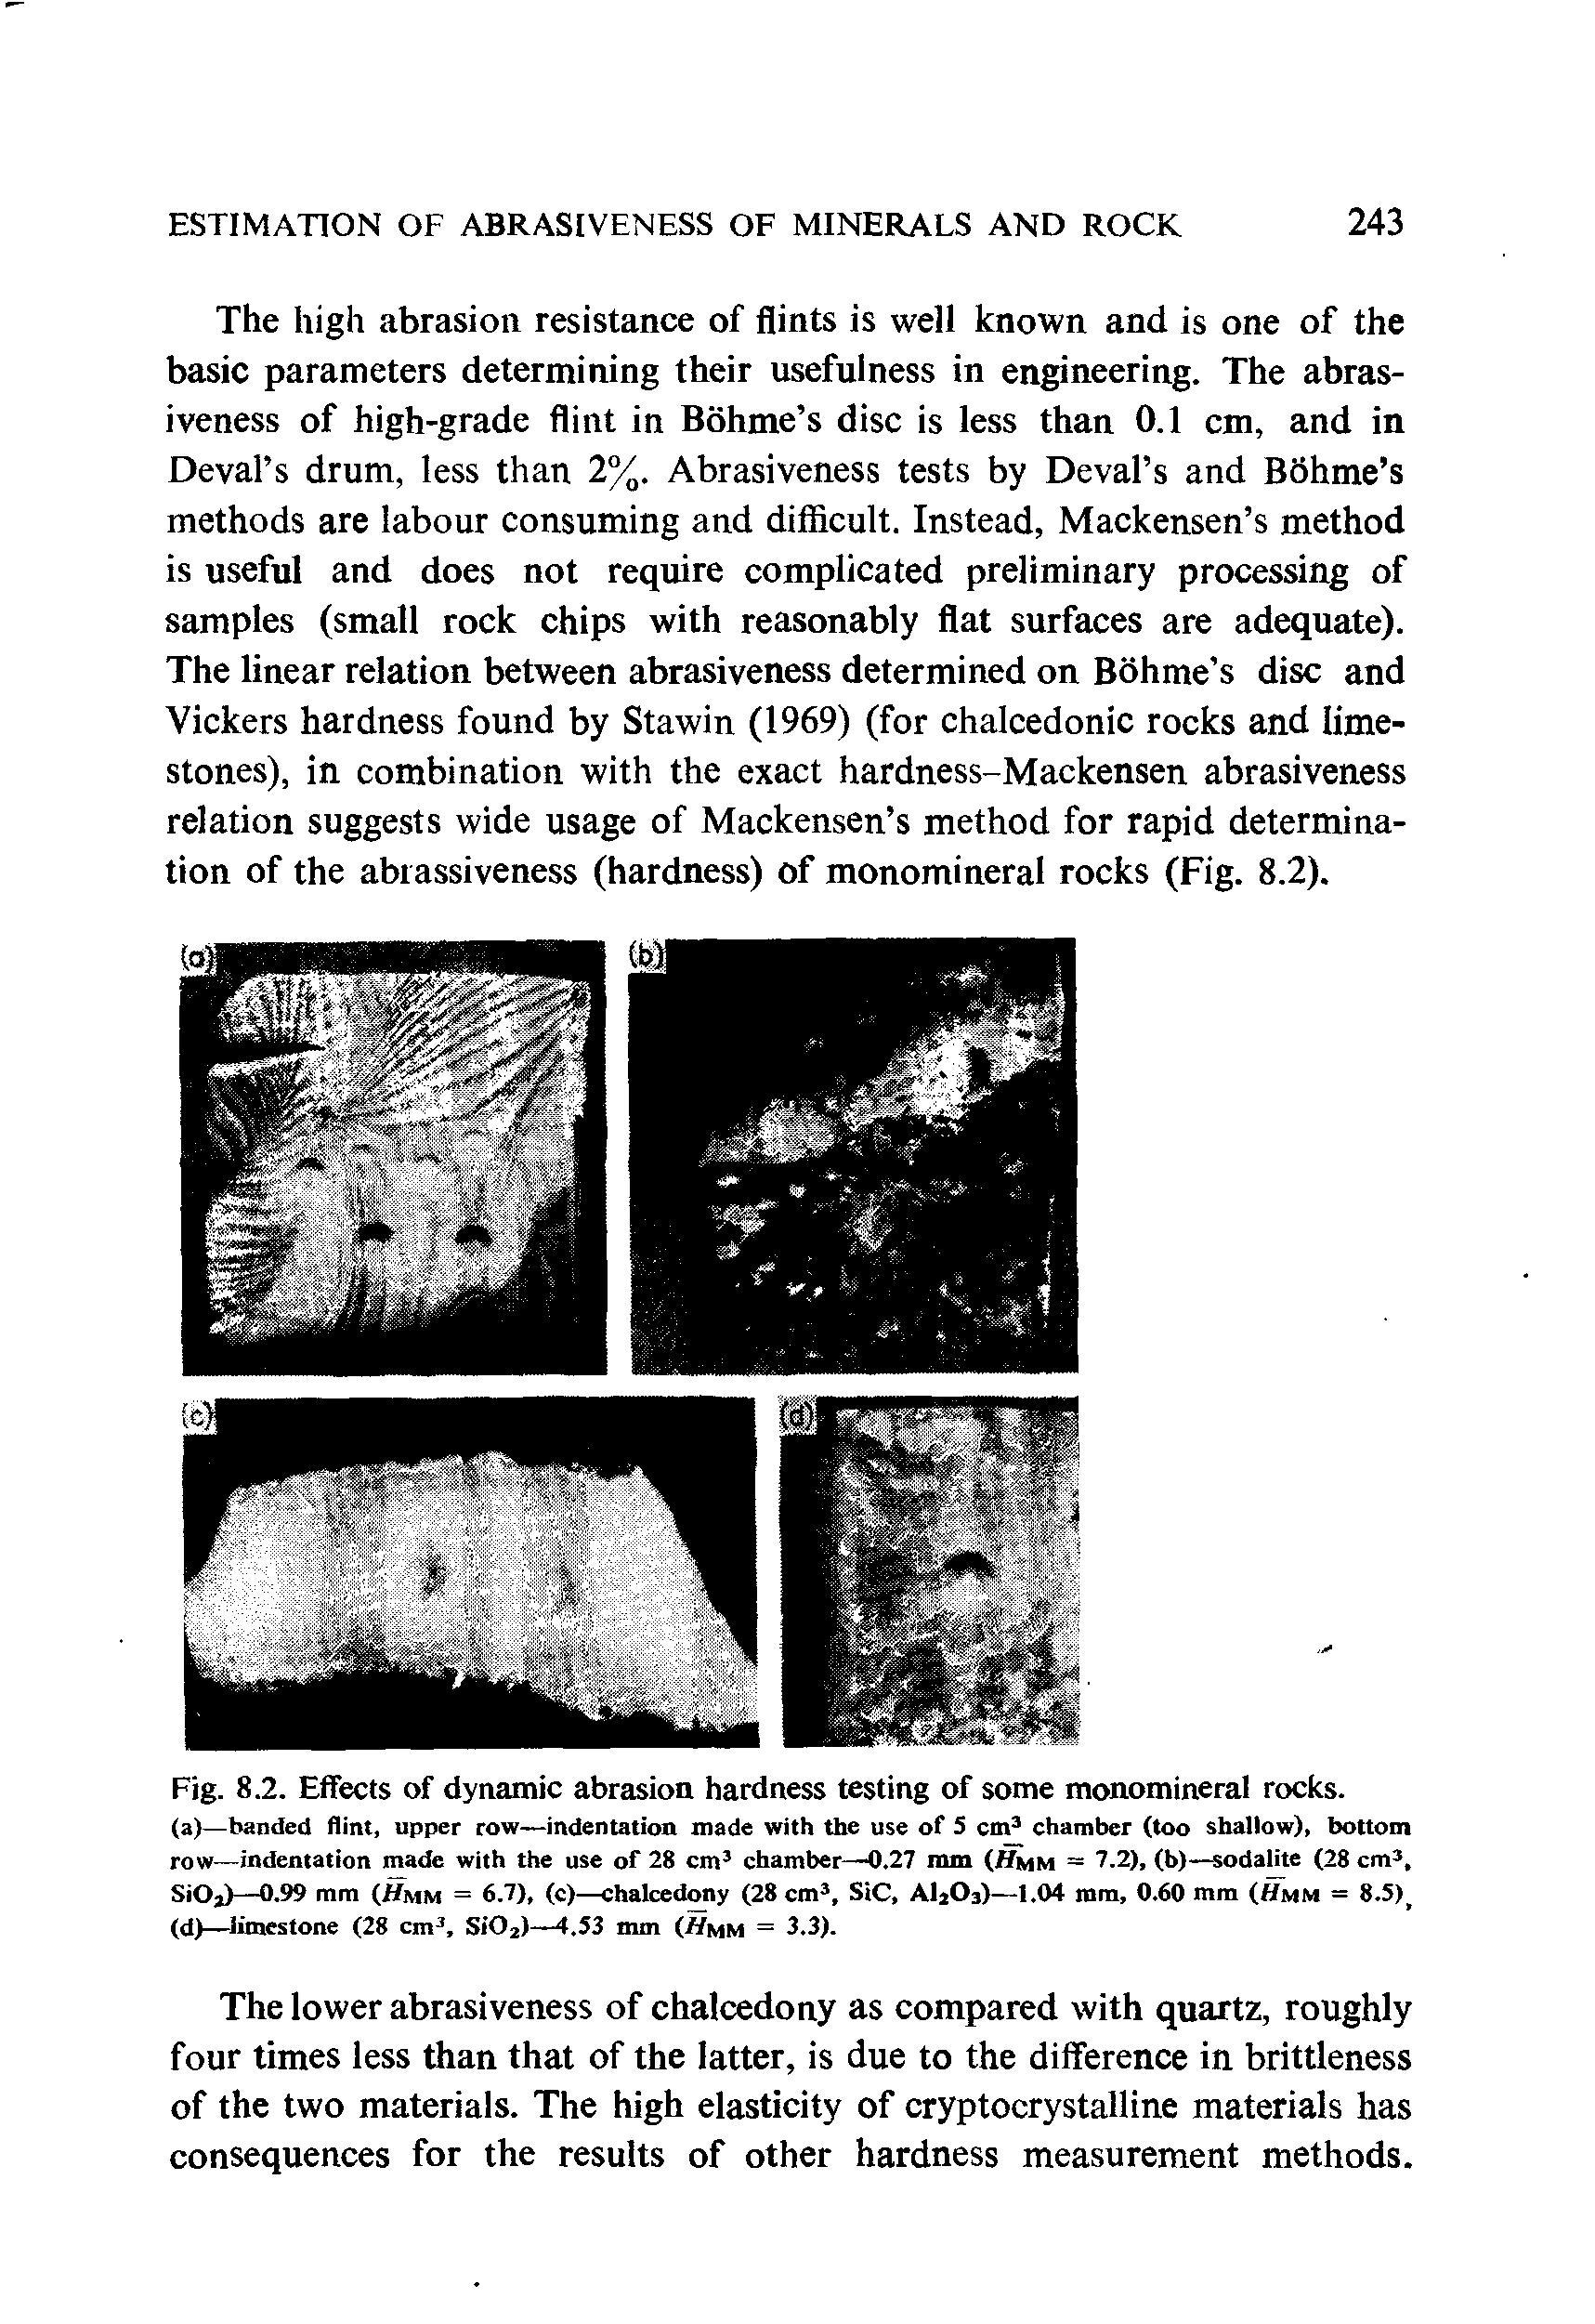 Fig. 8.2. Effects of dynamic abrasion hardness testing of some monomineral rocks.